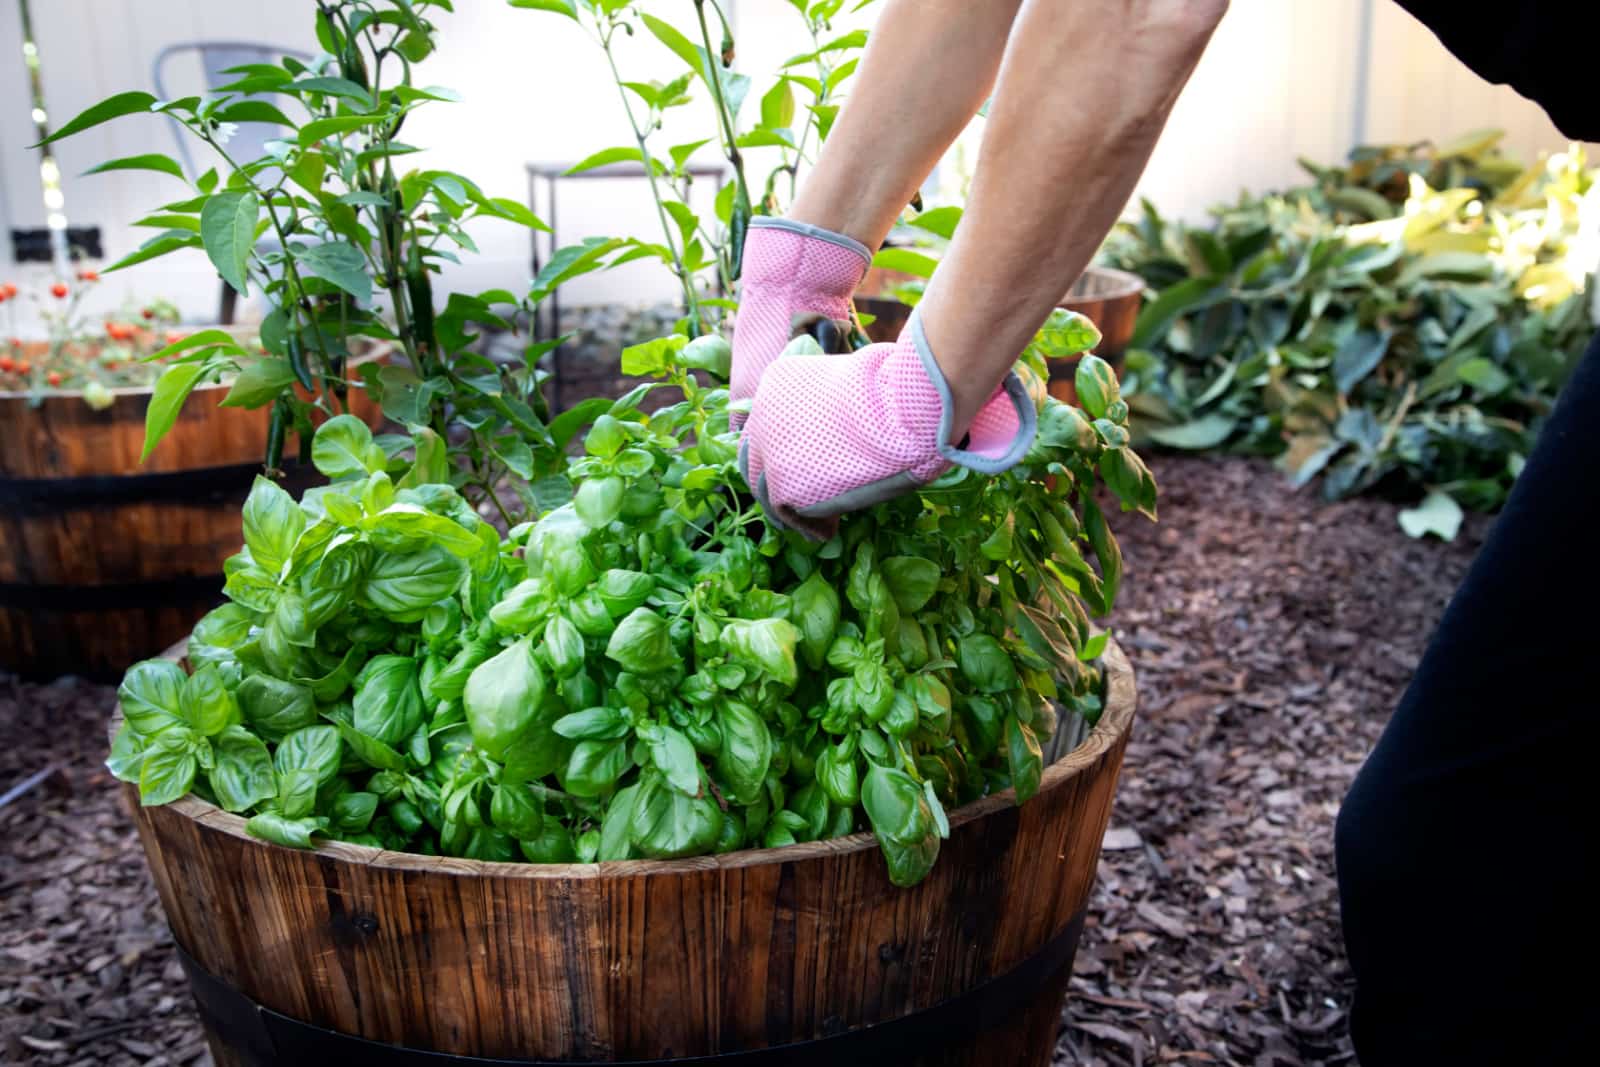 Basil being tended to in a garden planted in a wood barrel